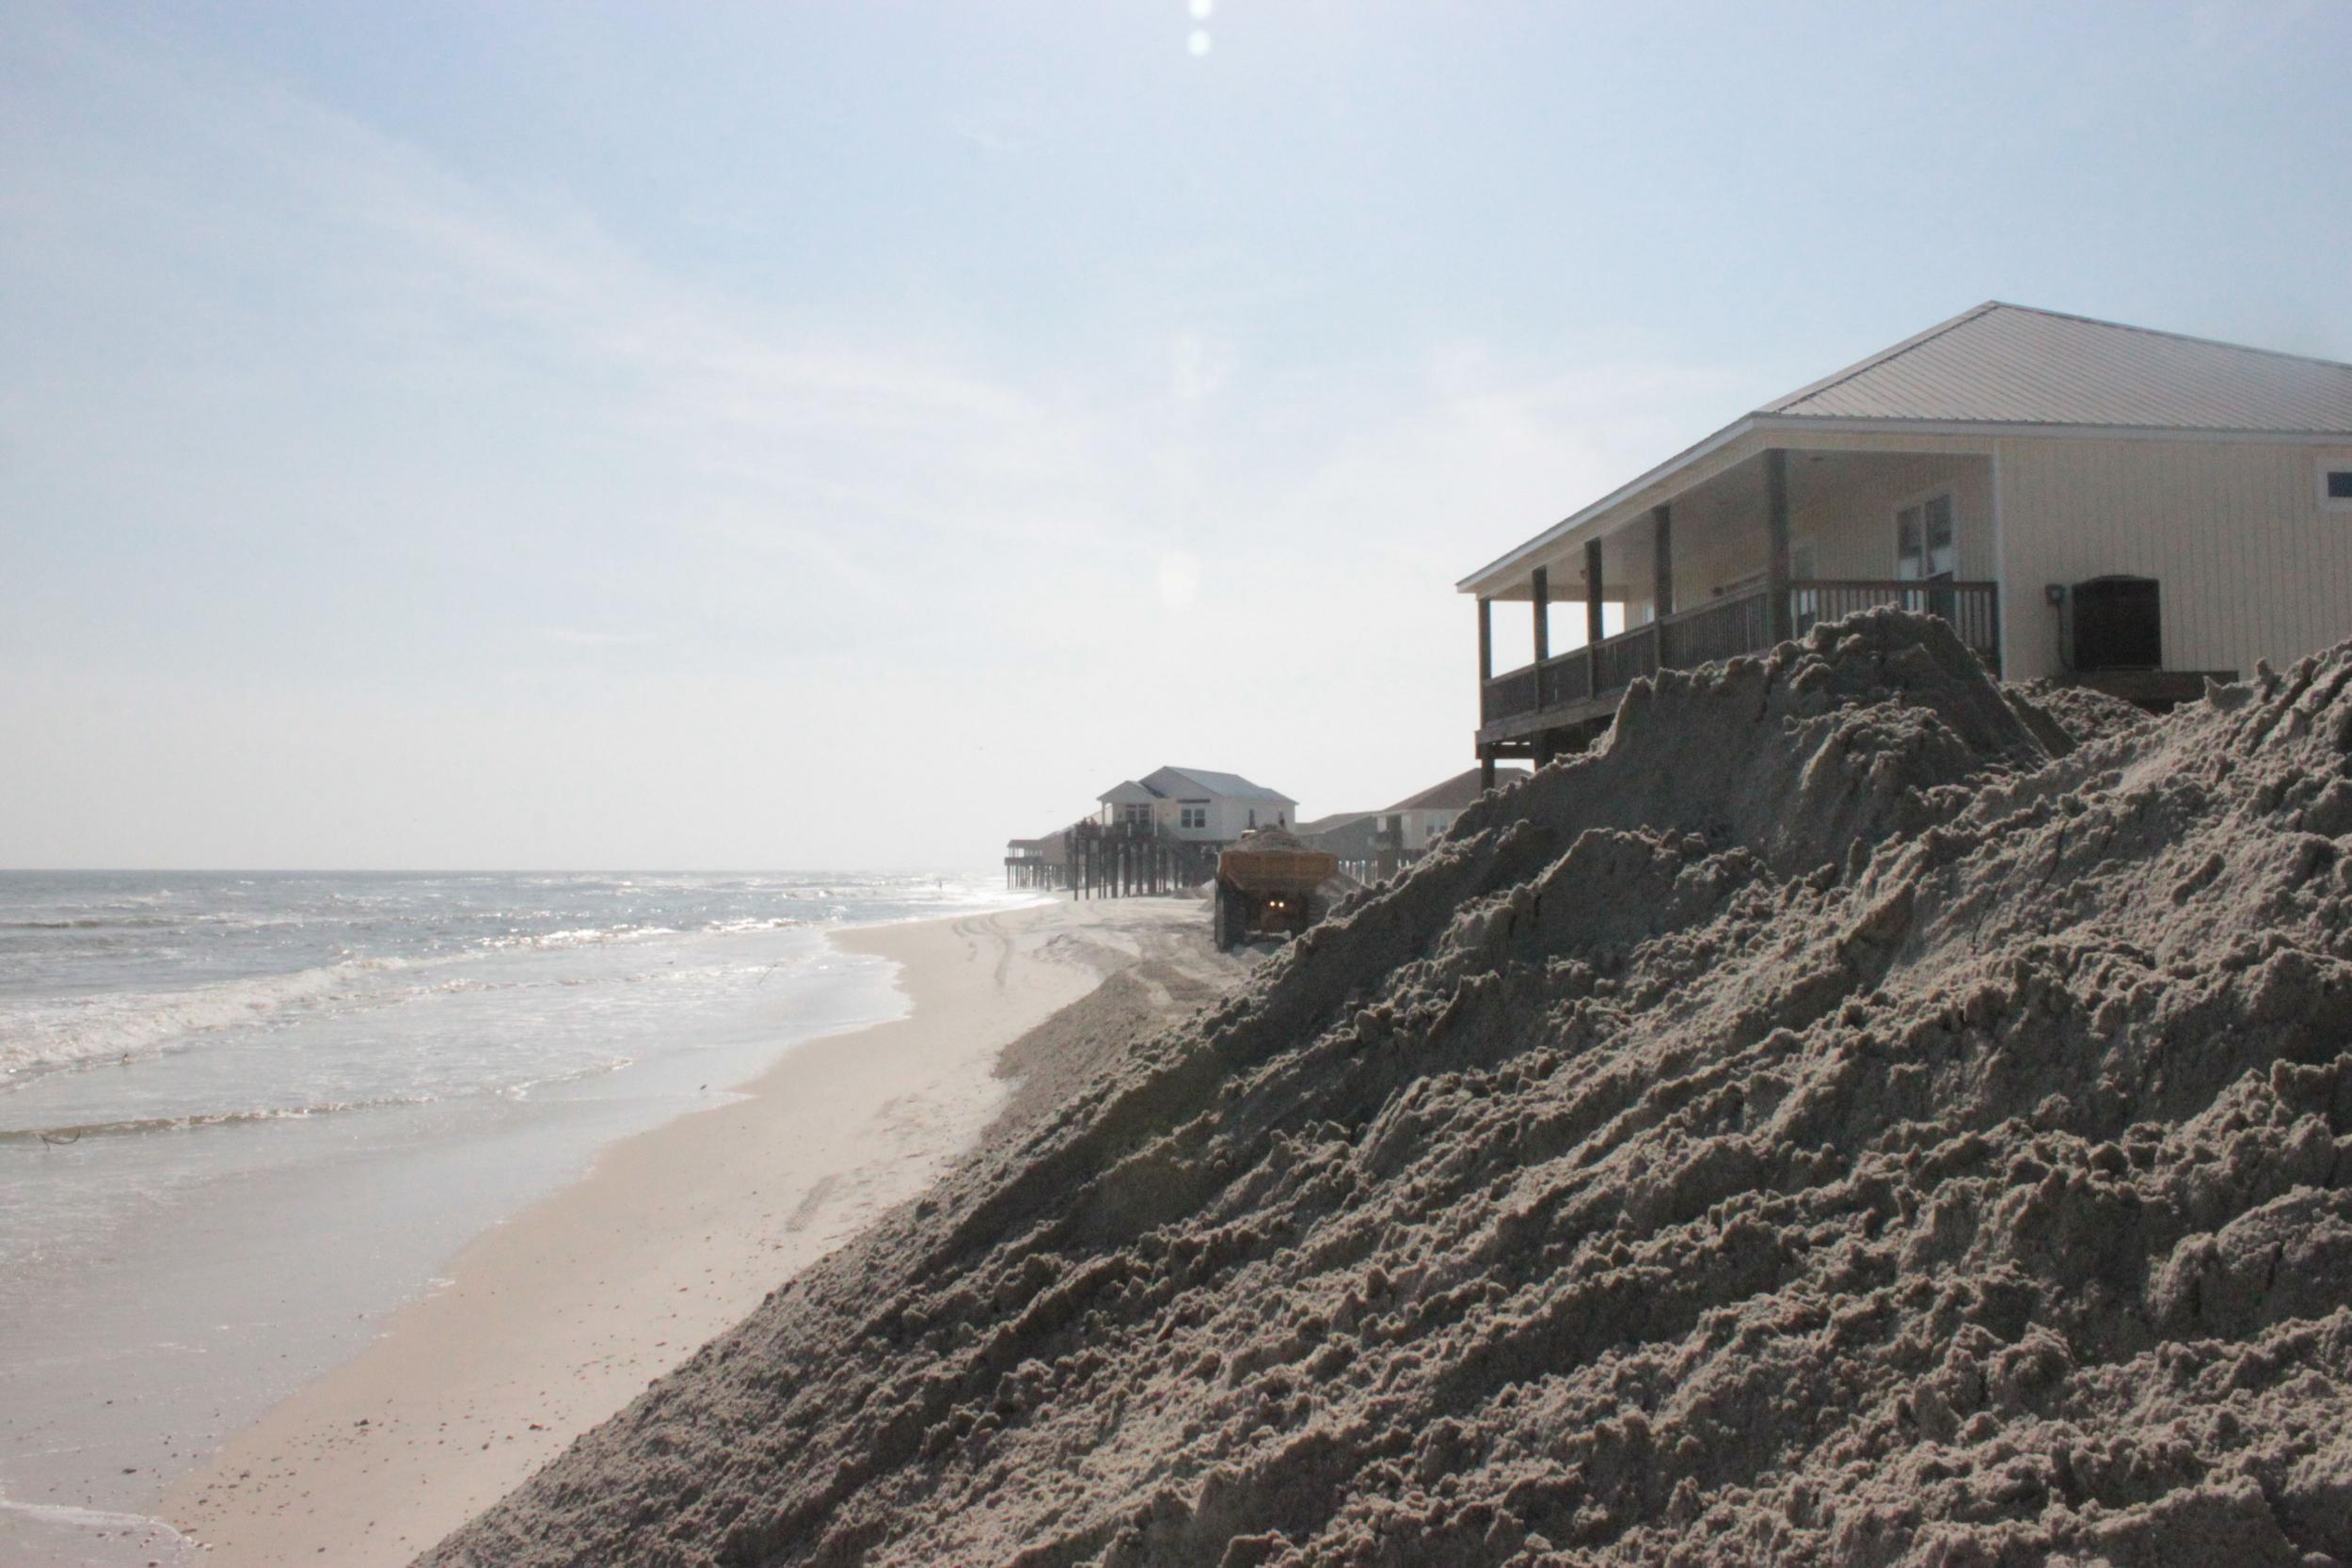 &#13;
The deserted sands of Dauphin Island will offer you peace and tranquility in Alabama &#13;